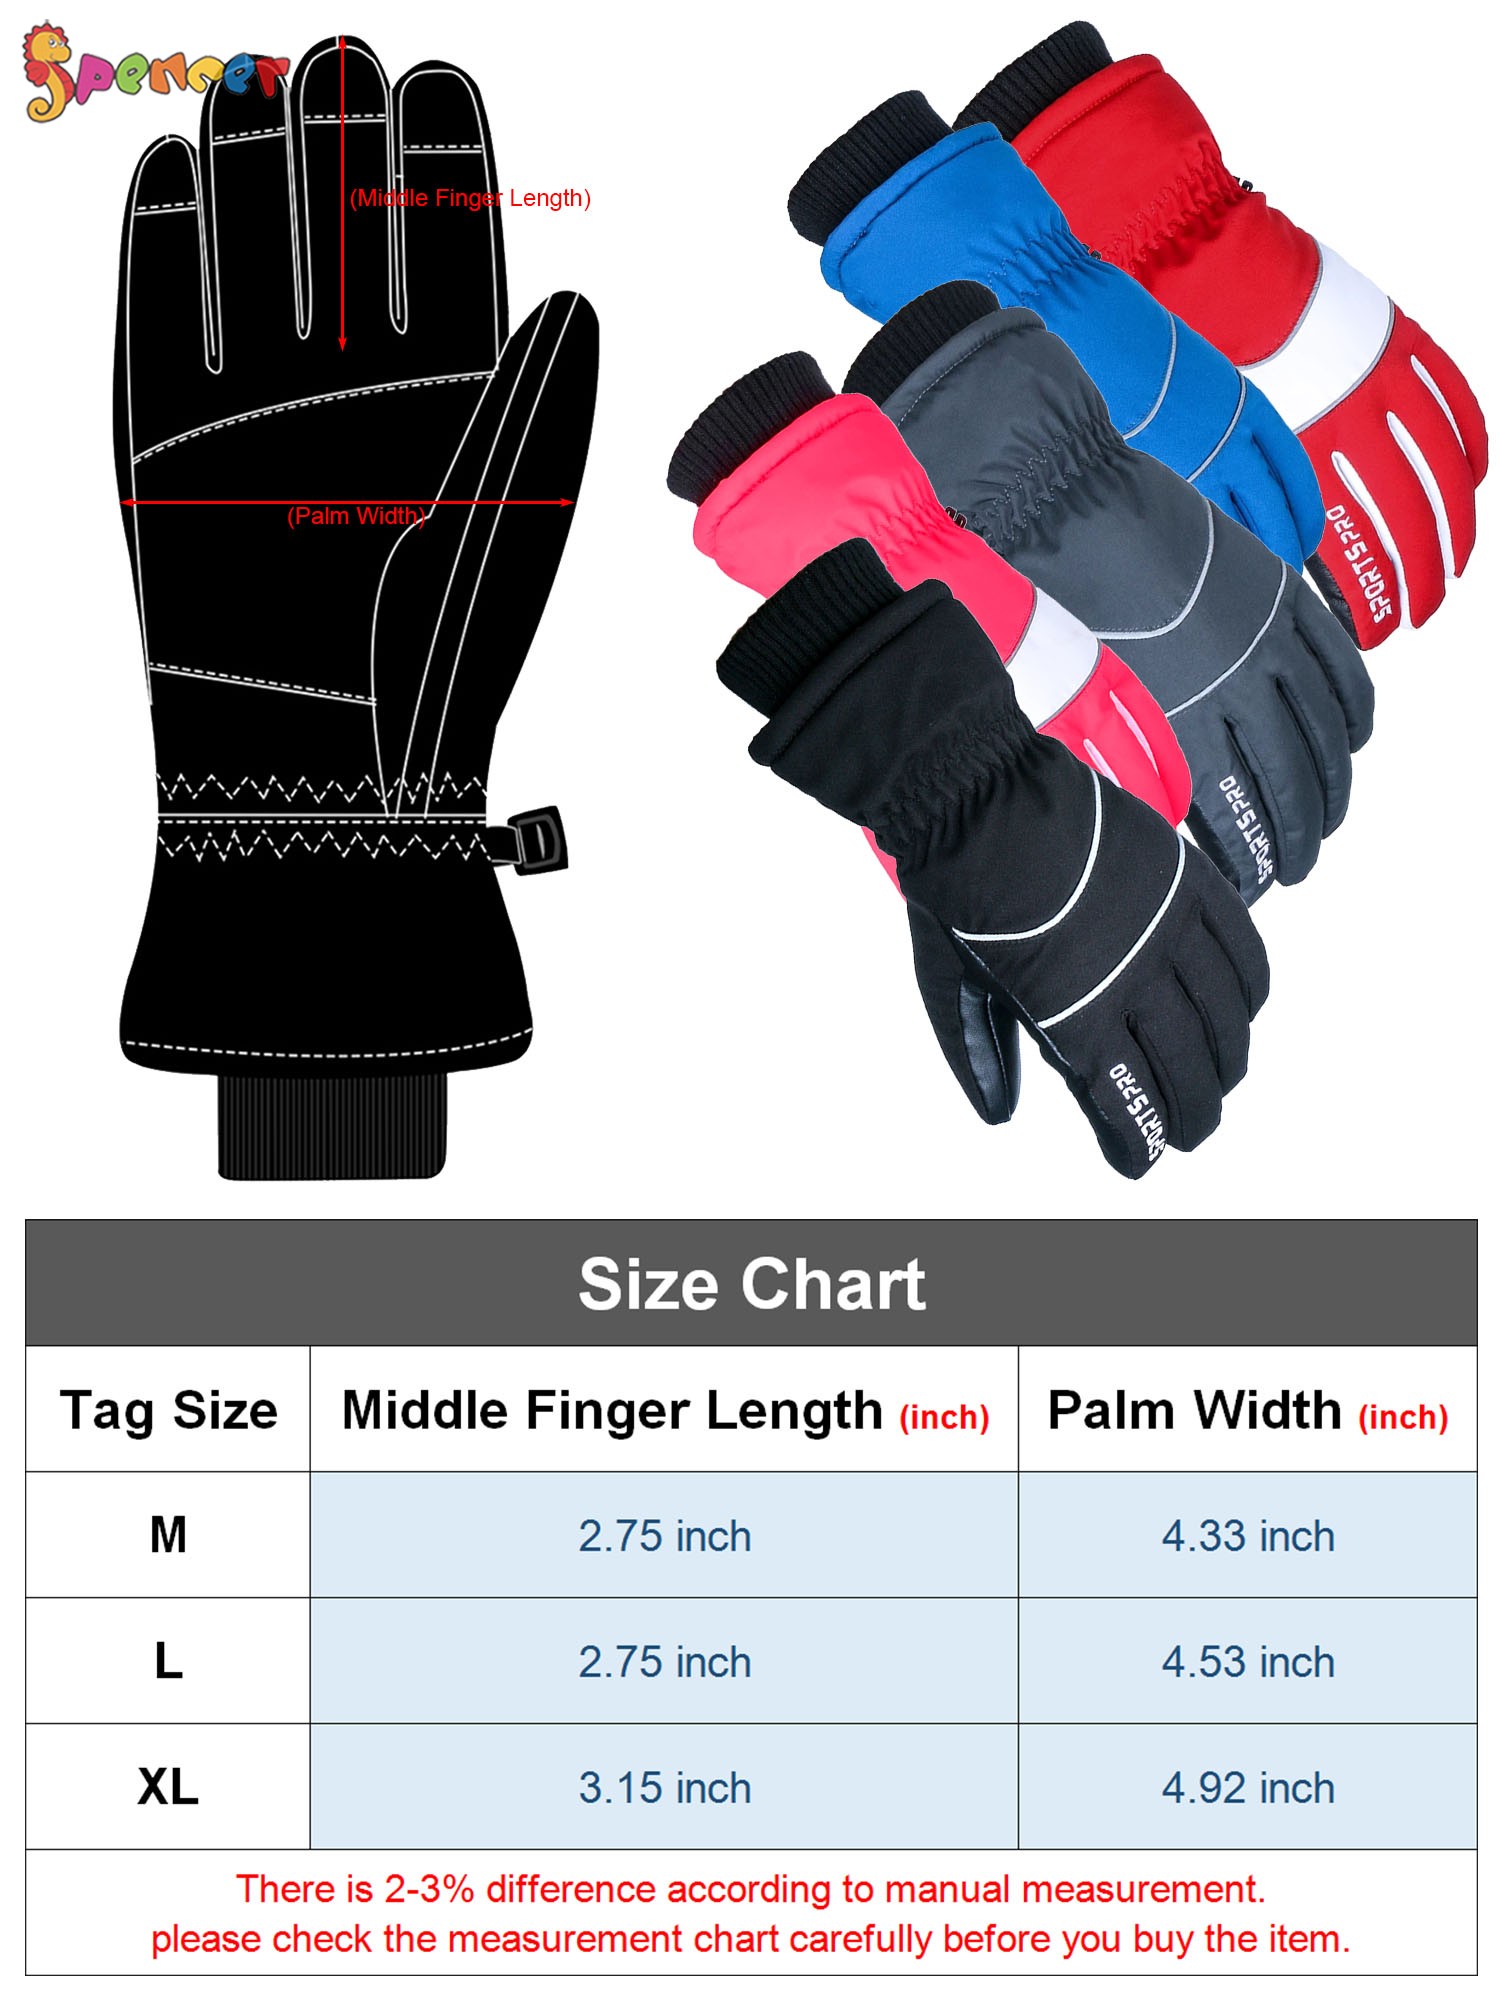 Spencer Ski & Snow Gloves for Men Women, Waterproof Winter Touchscreen Snowboard Gloves for Cold Weather Skiing and Snowboarding - image 3 of 8